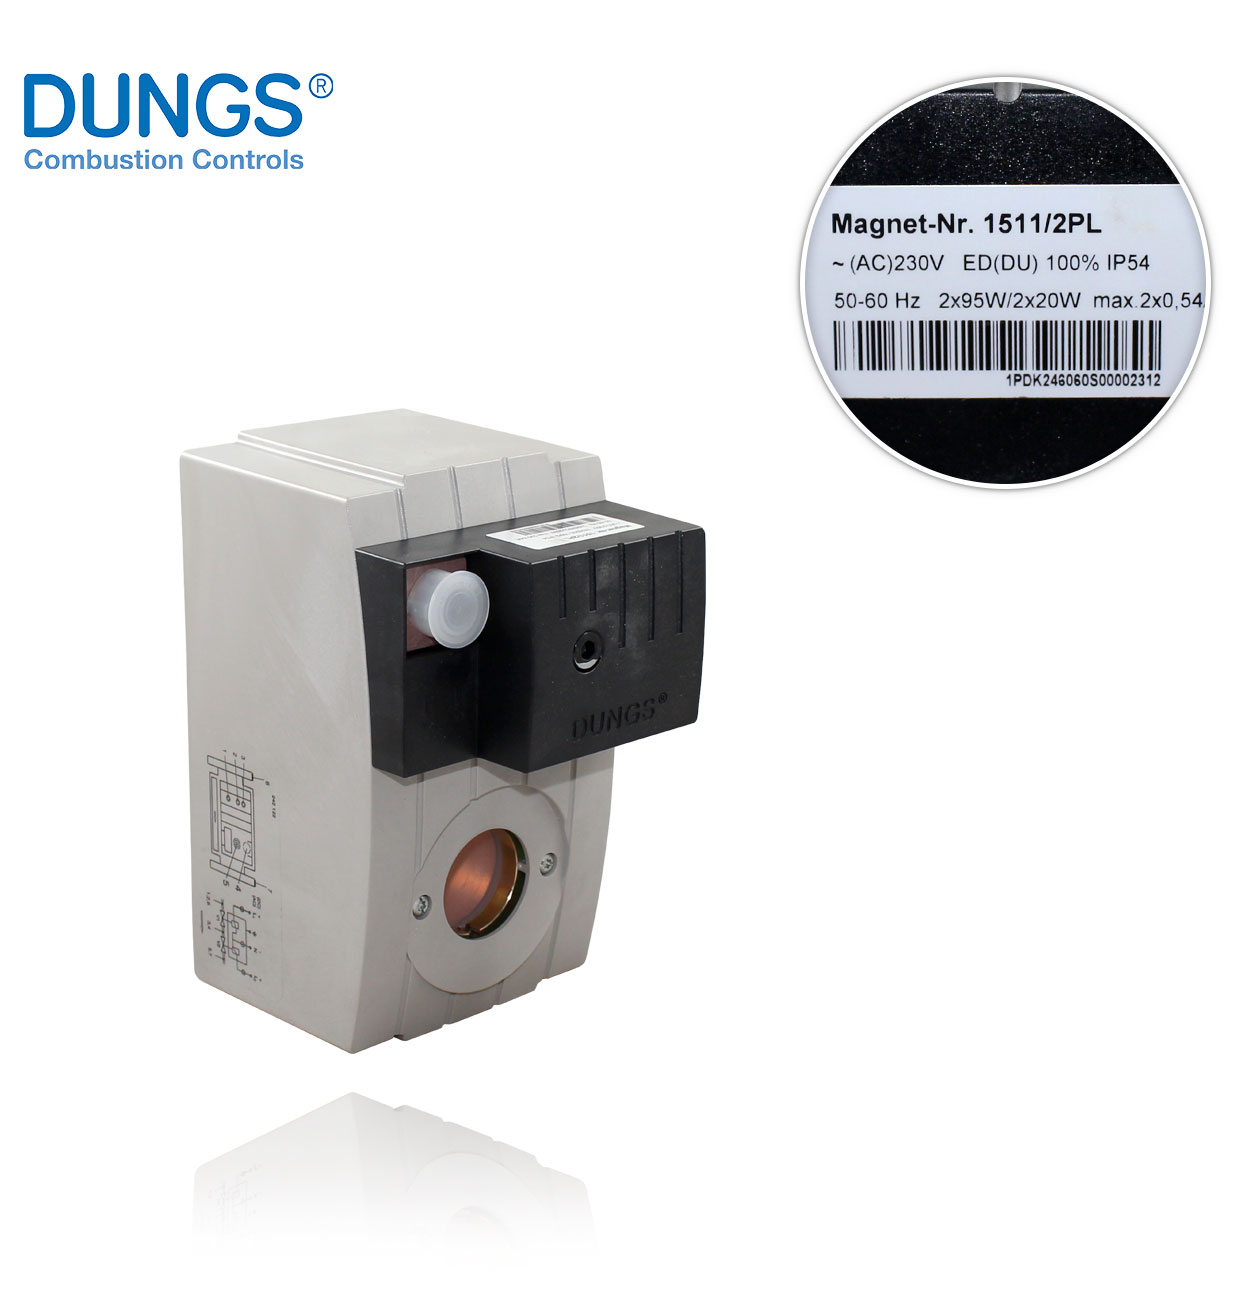 NR 1511/2PL 220/240 V DUNGS CONNECTOR COIL FOR DMV-DLE 5080/11 ECO 248496